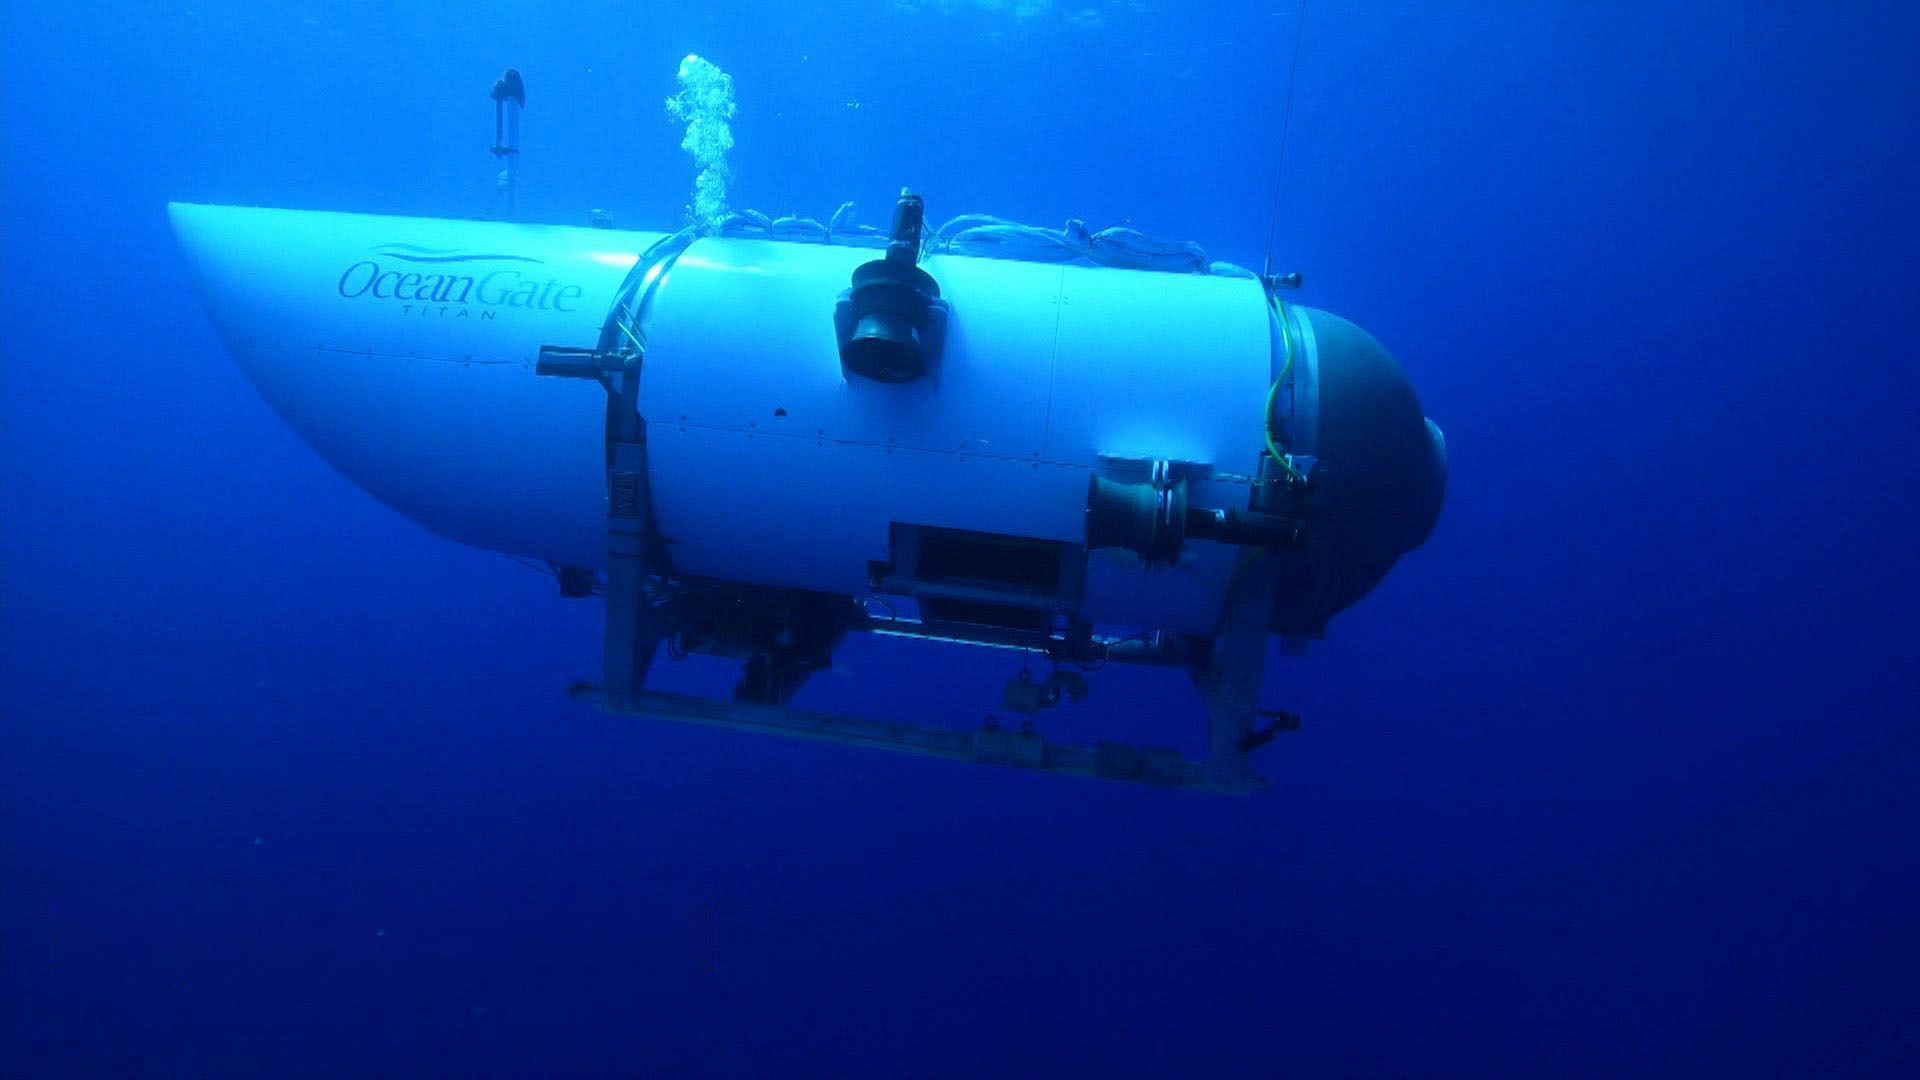 Watch CBS Mornings: What it's like diving on missing submarine - Full ...